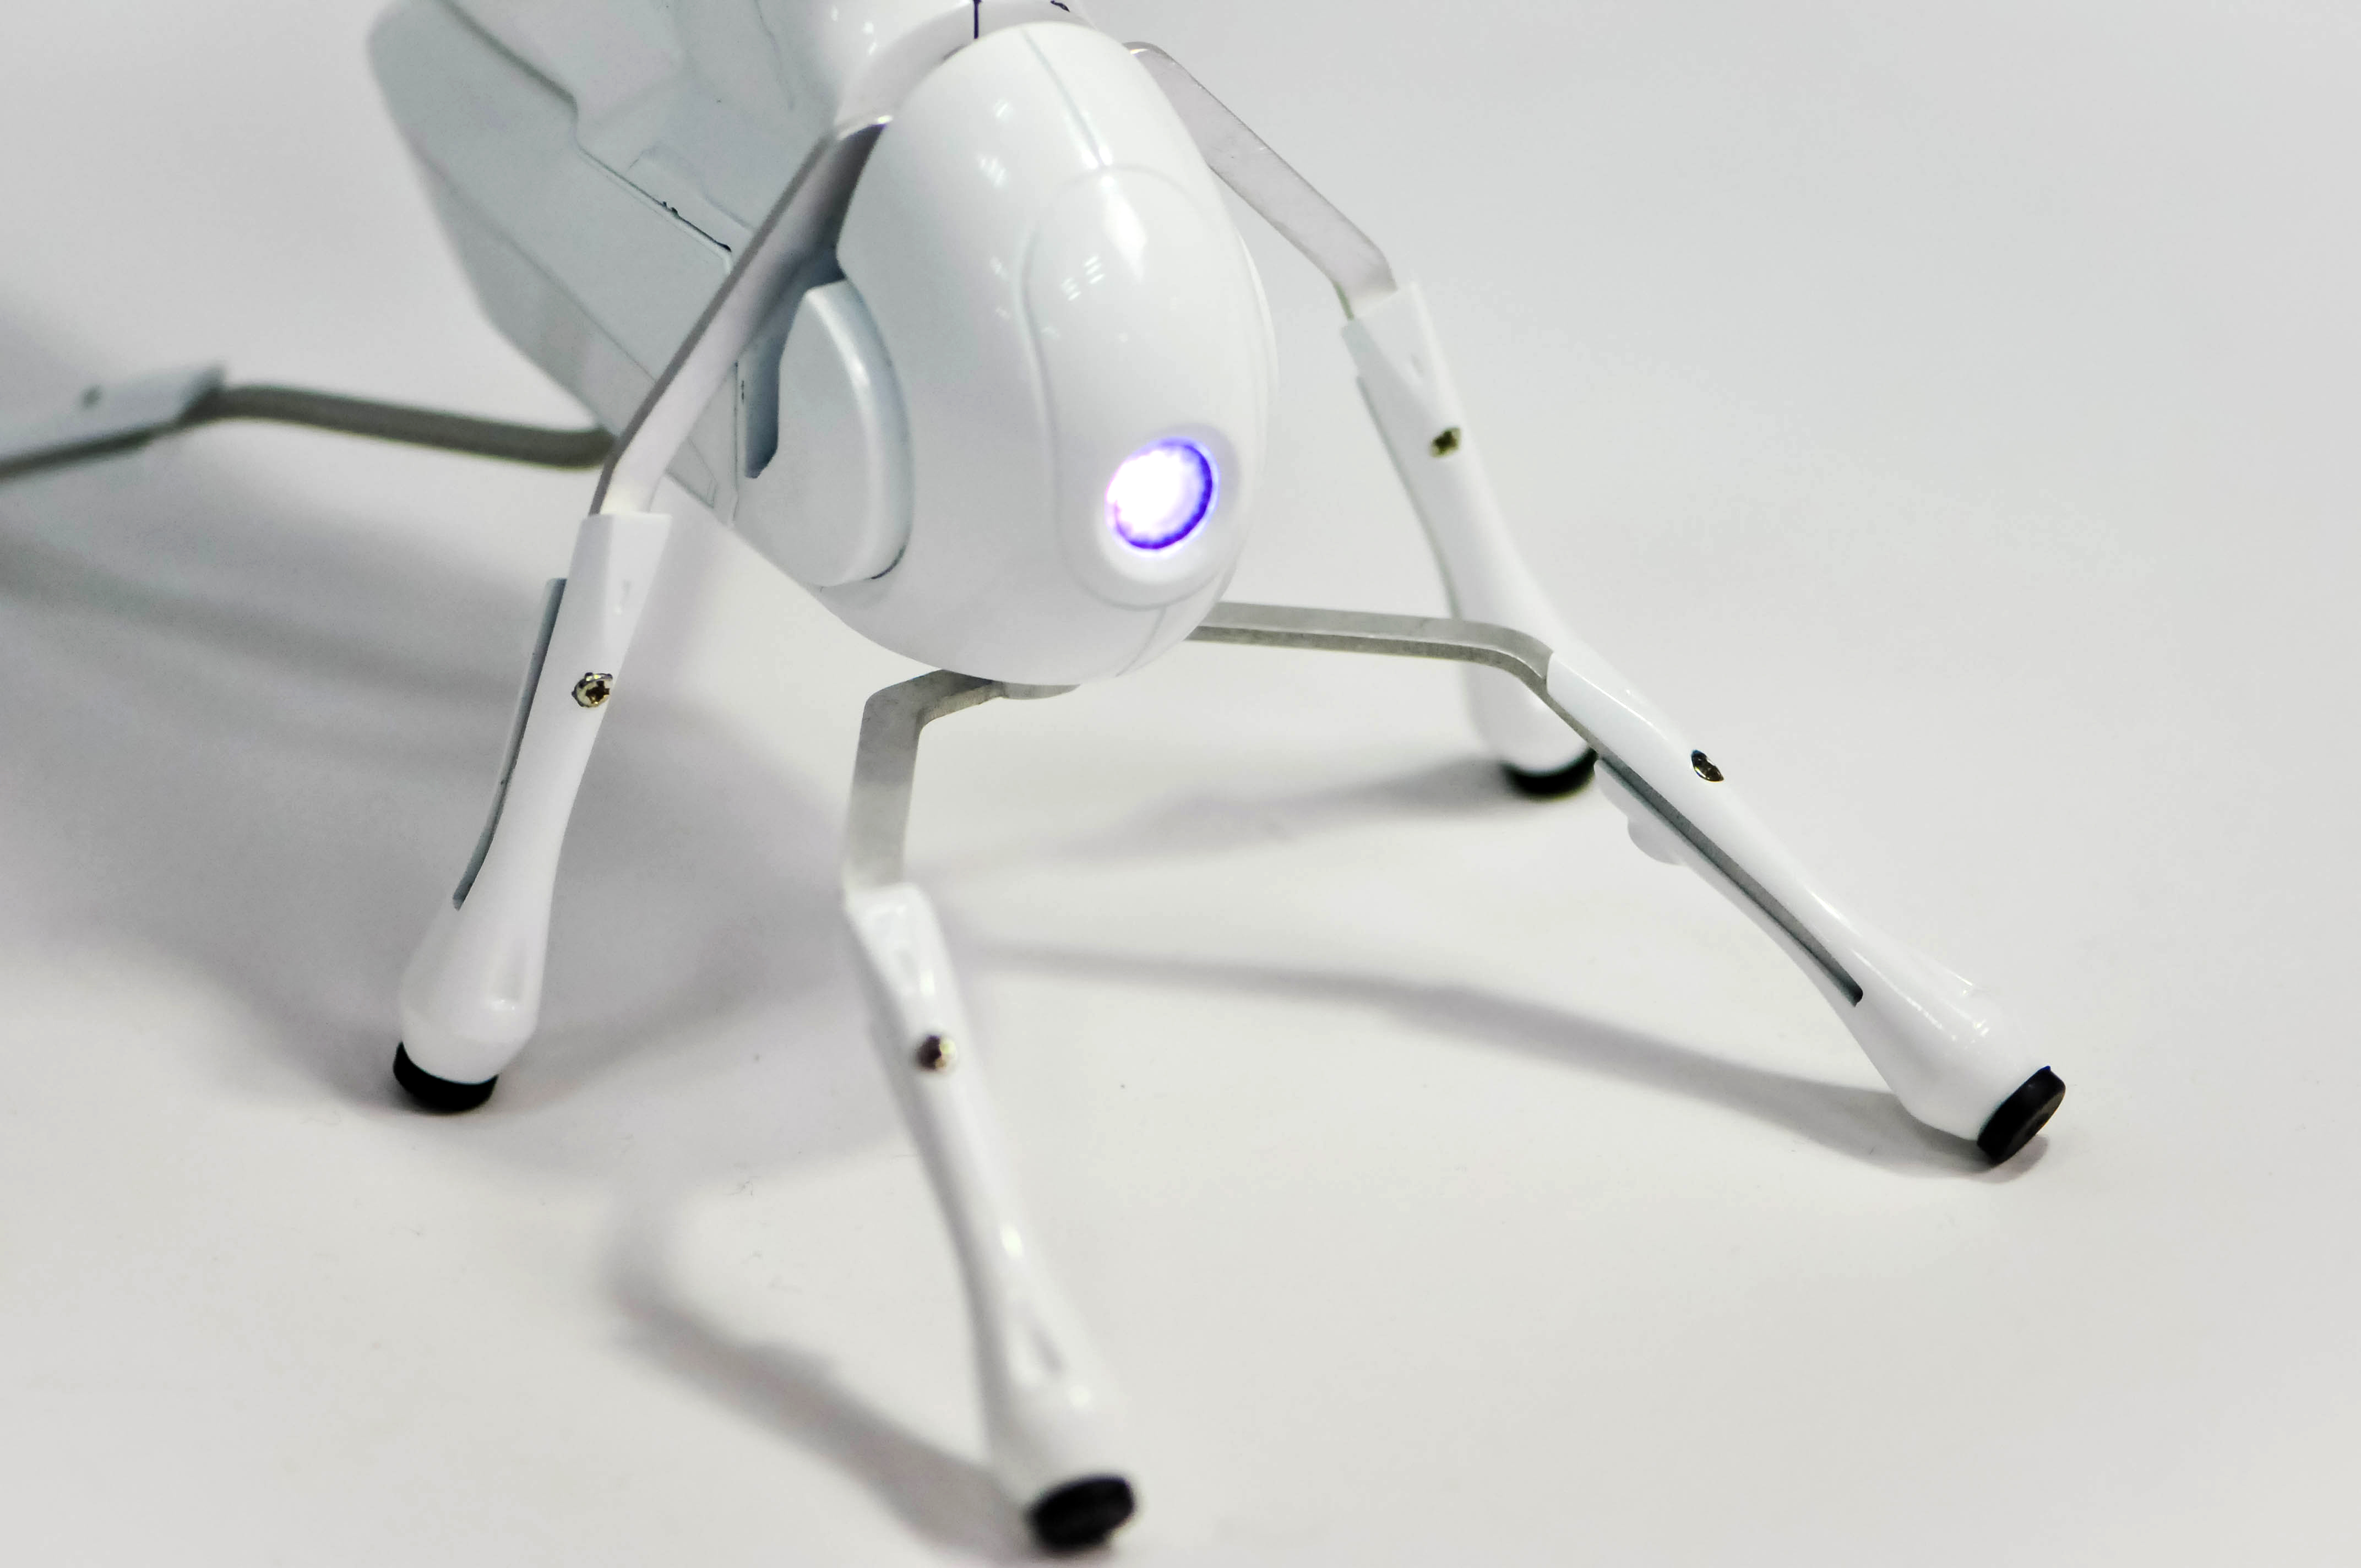 Antbo is a robot insect companion anyone can build